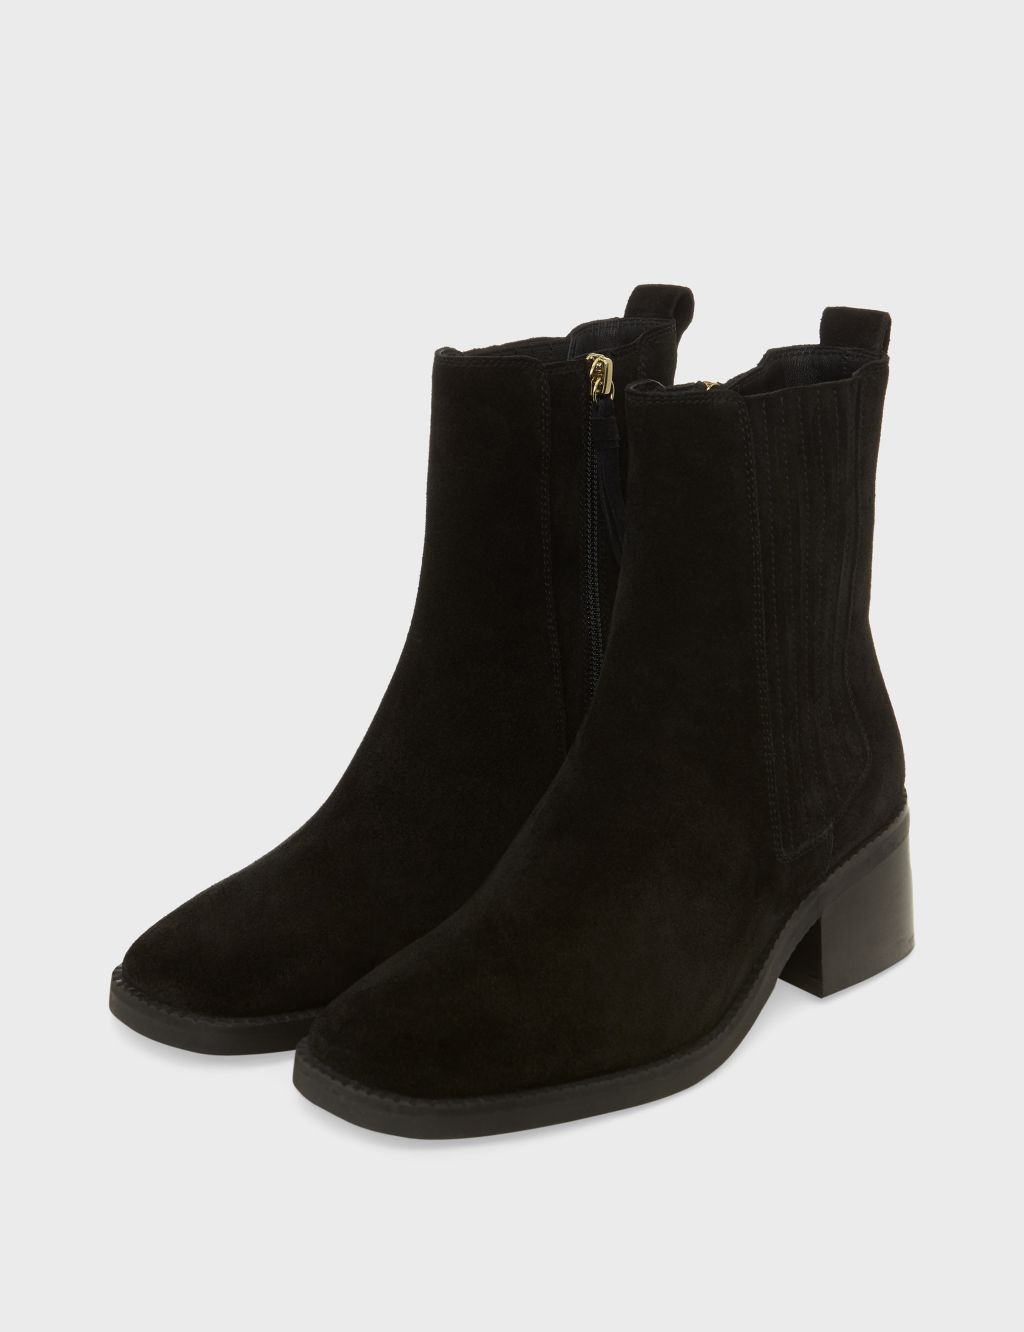 Suede Block Heel Square Toe Ankle Boots image 2